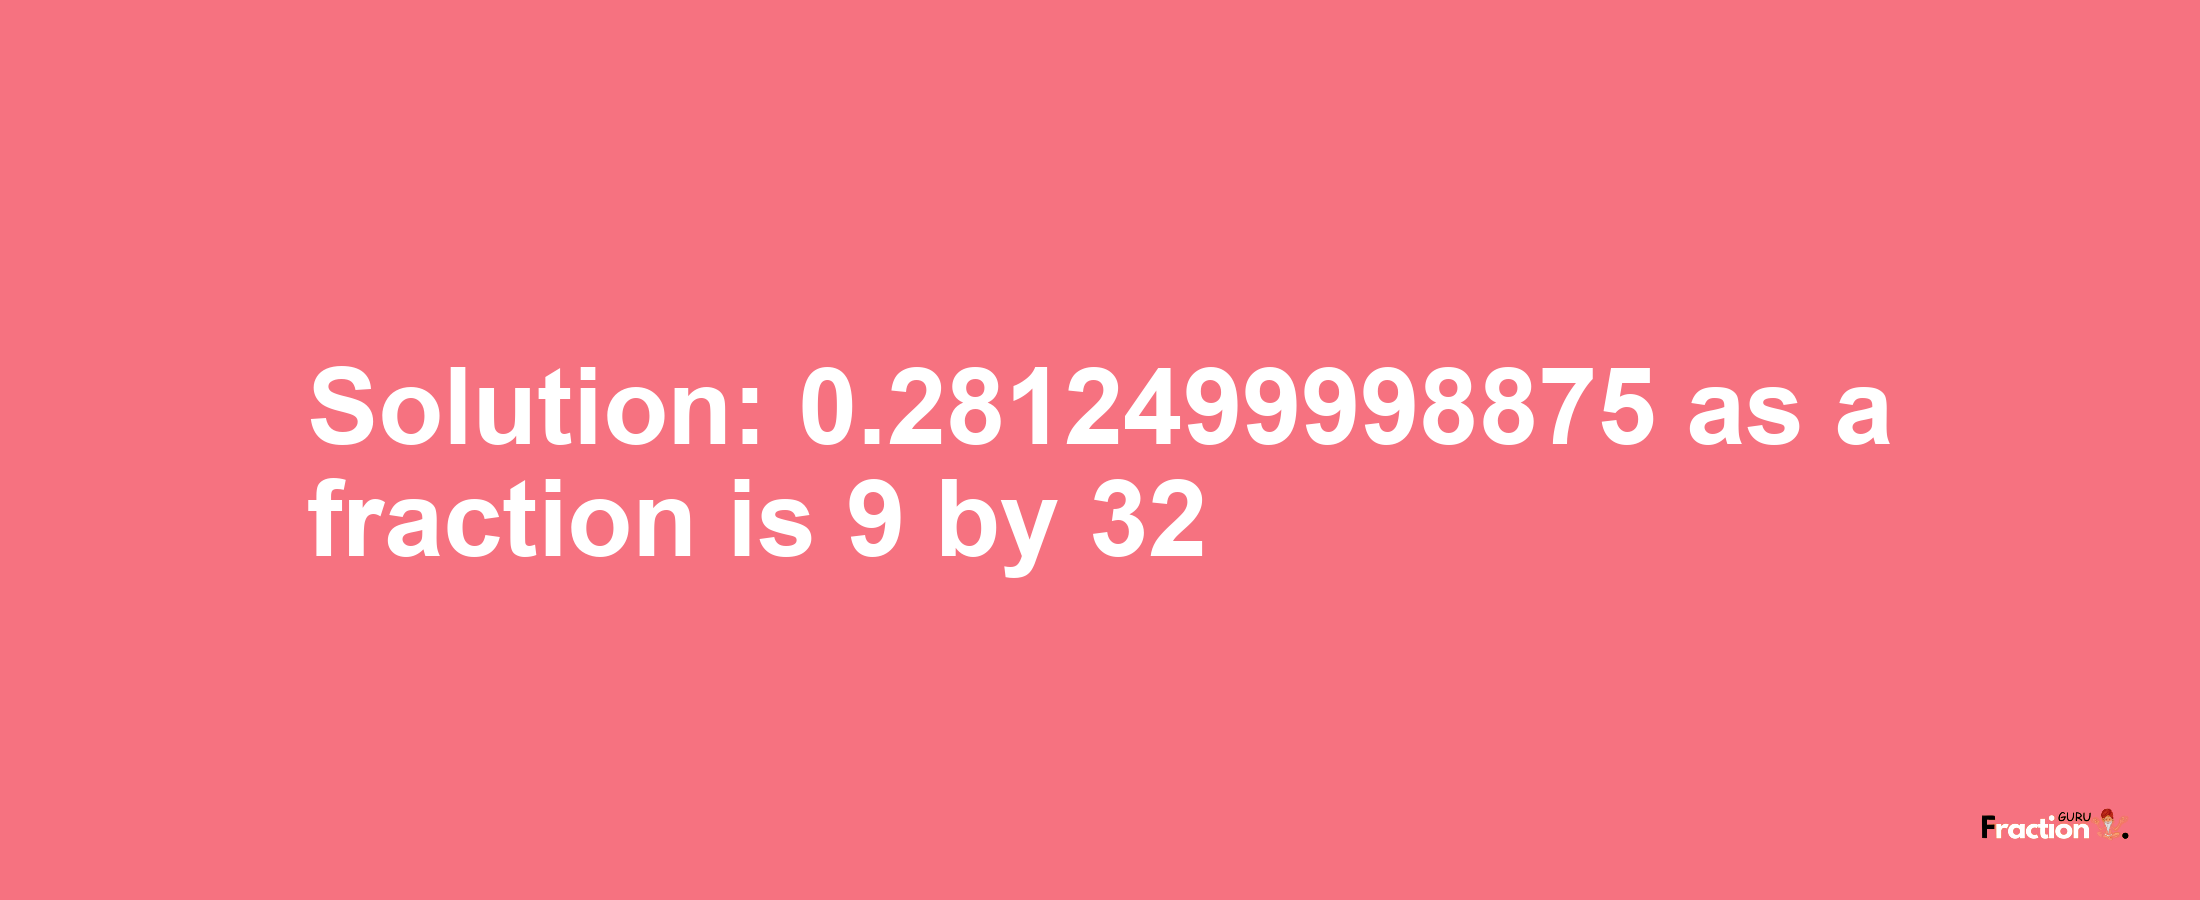 Solution:0.2812499998875 as a fraction is 9/32